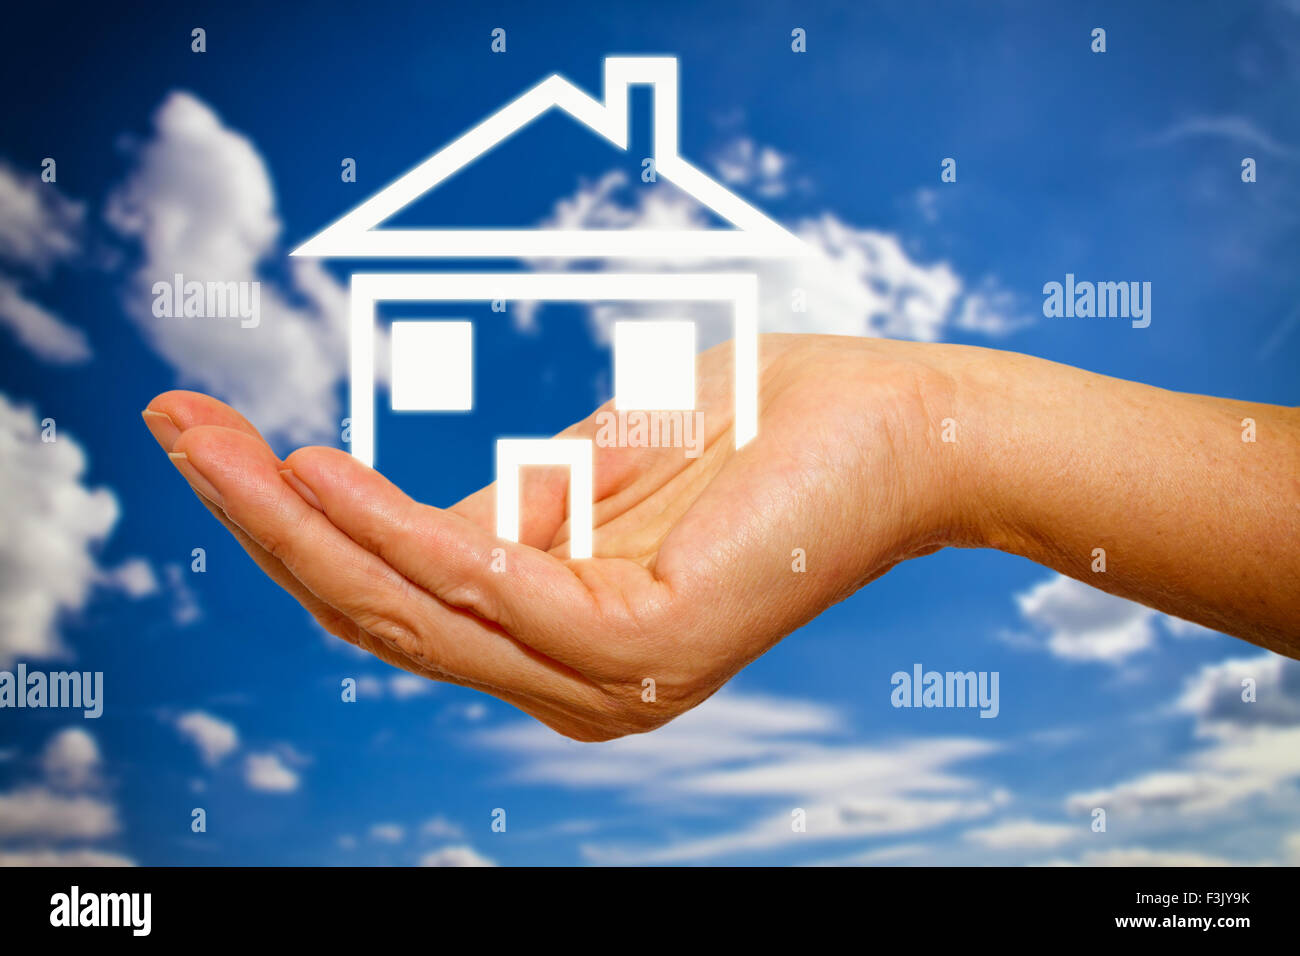 Shape of a house in a hand Stock Photo